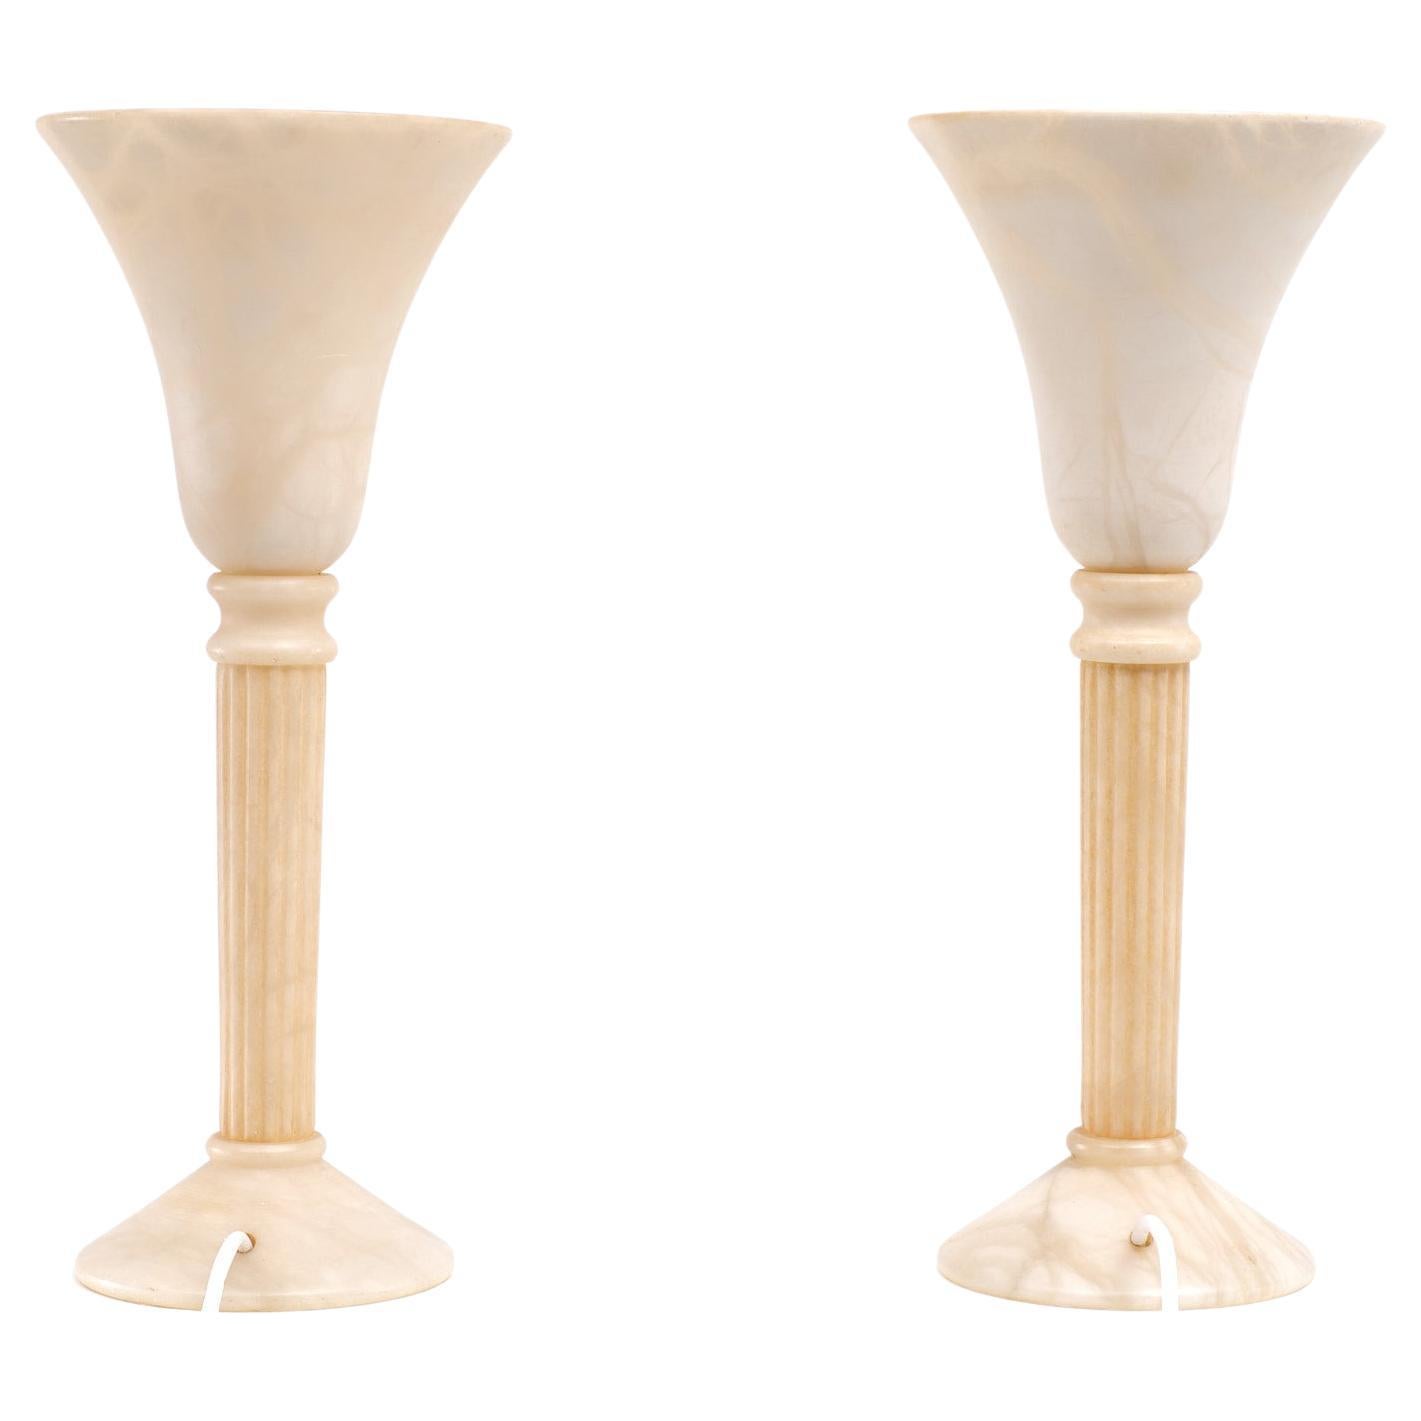 Two beautiful Alabaster table lamps. Classical Greek Timeless design
gives a wonderful warm light. New rewired. small socket lamps needed.